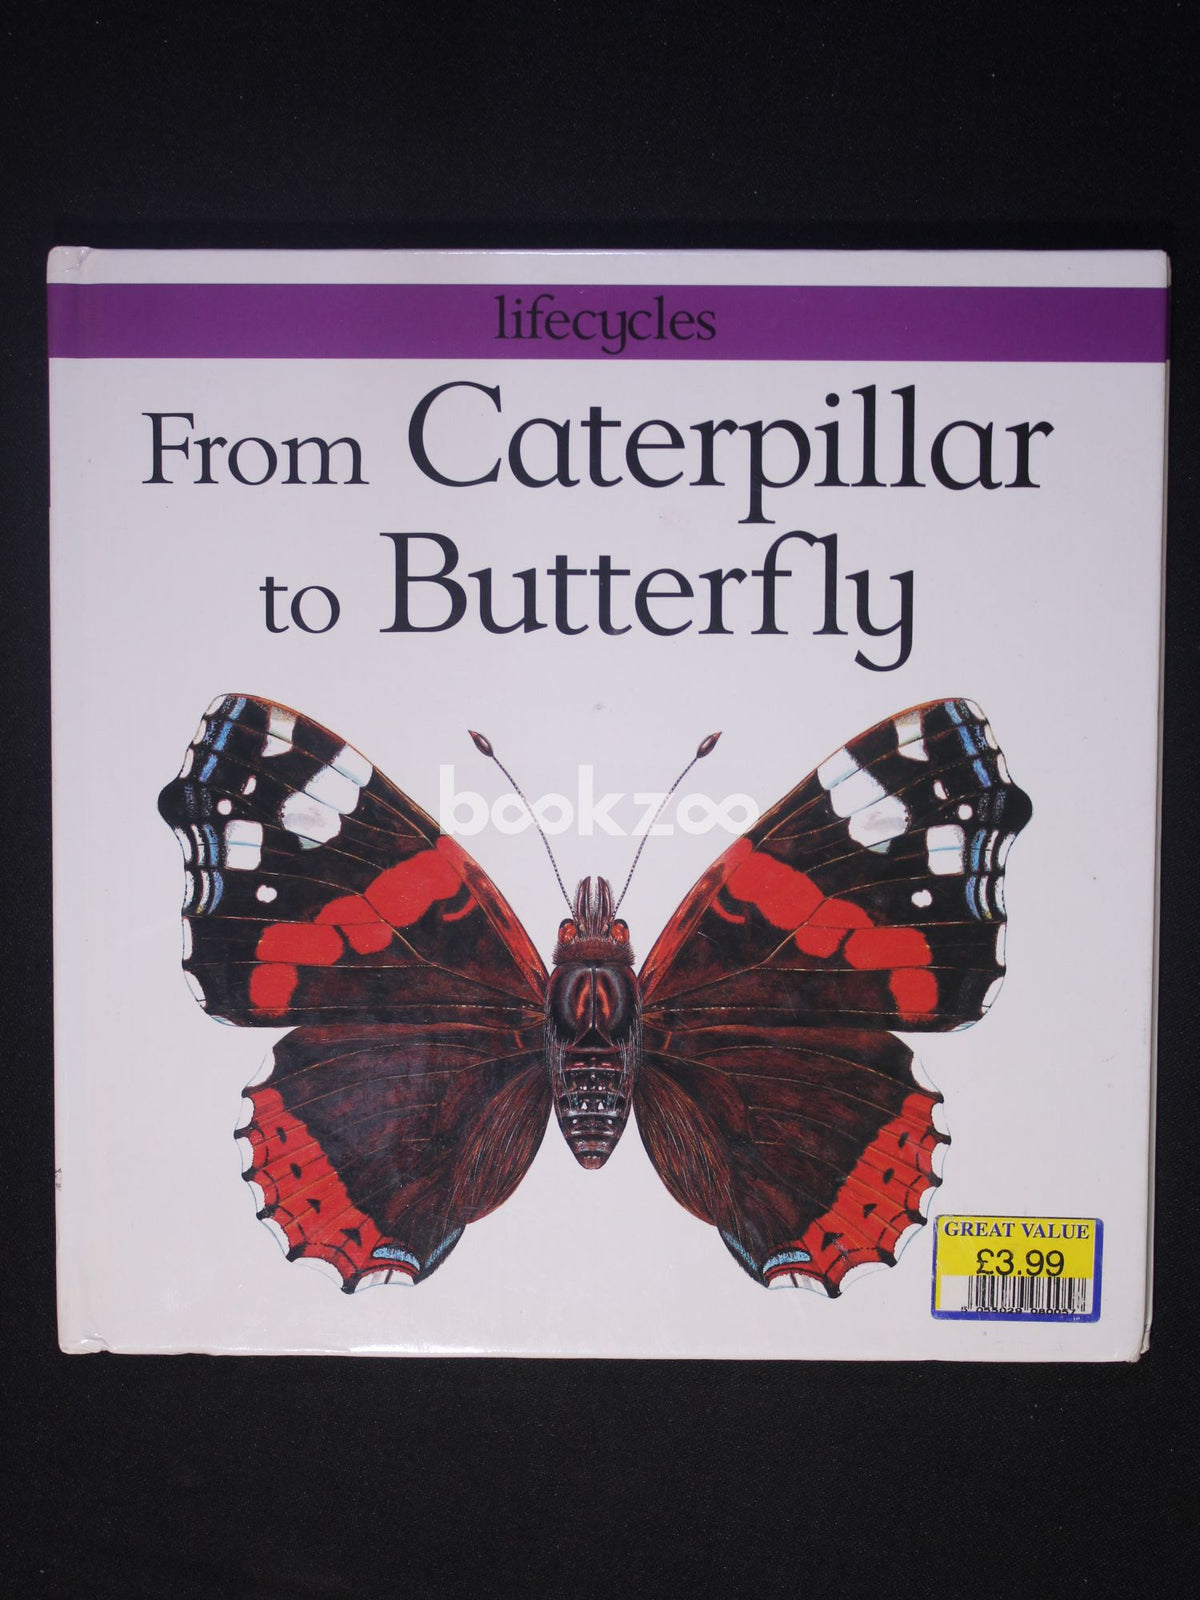 Buy From Caterpillar to Butterfly (Lifecycles) by David Stewart ...